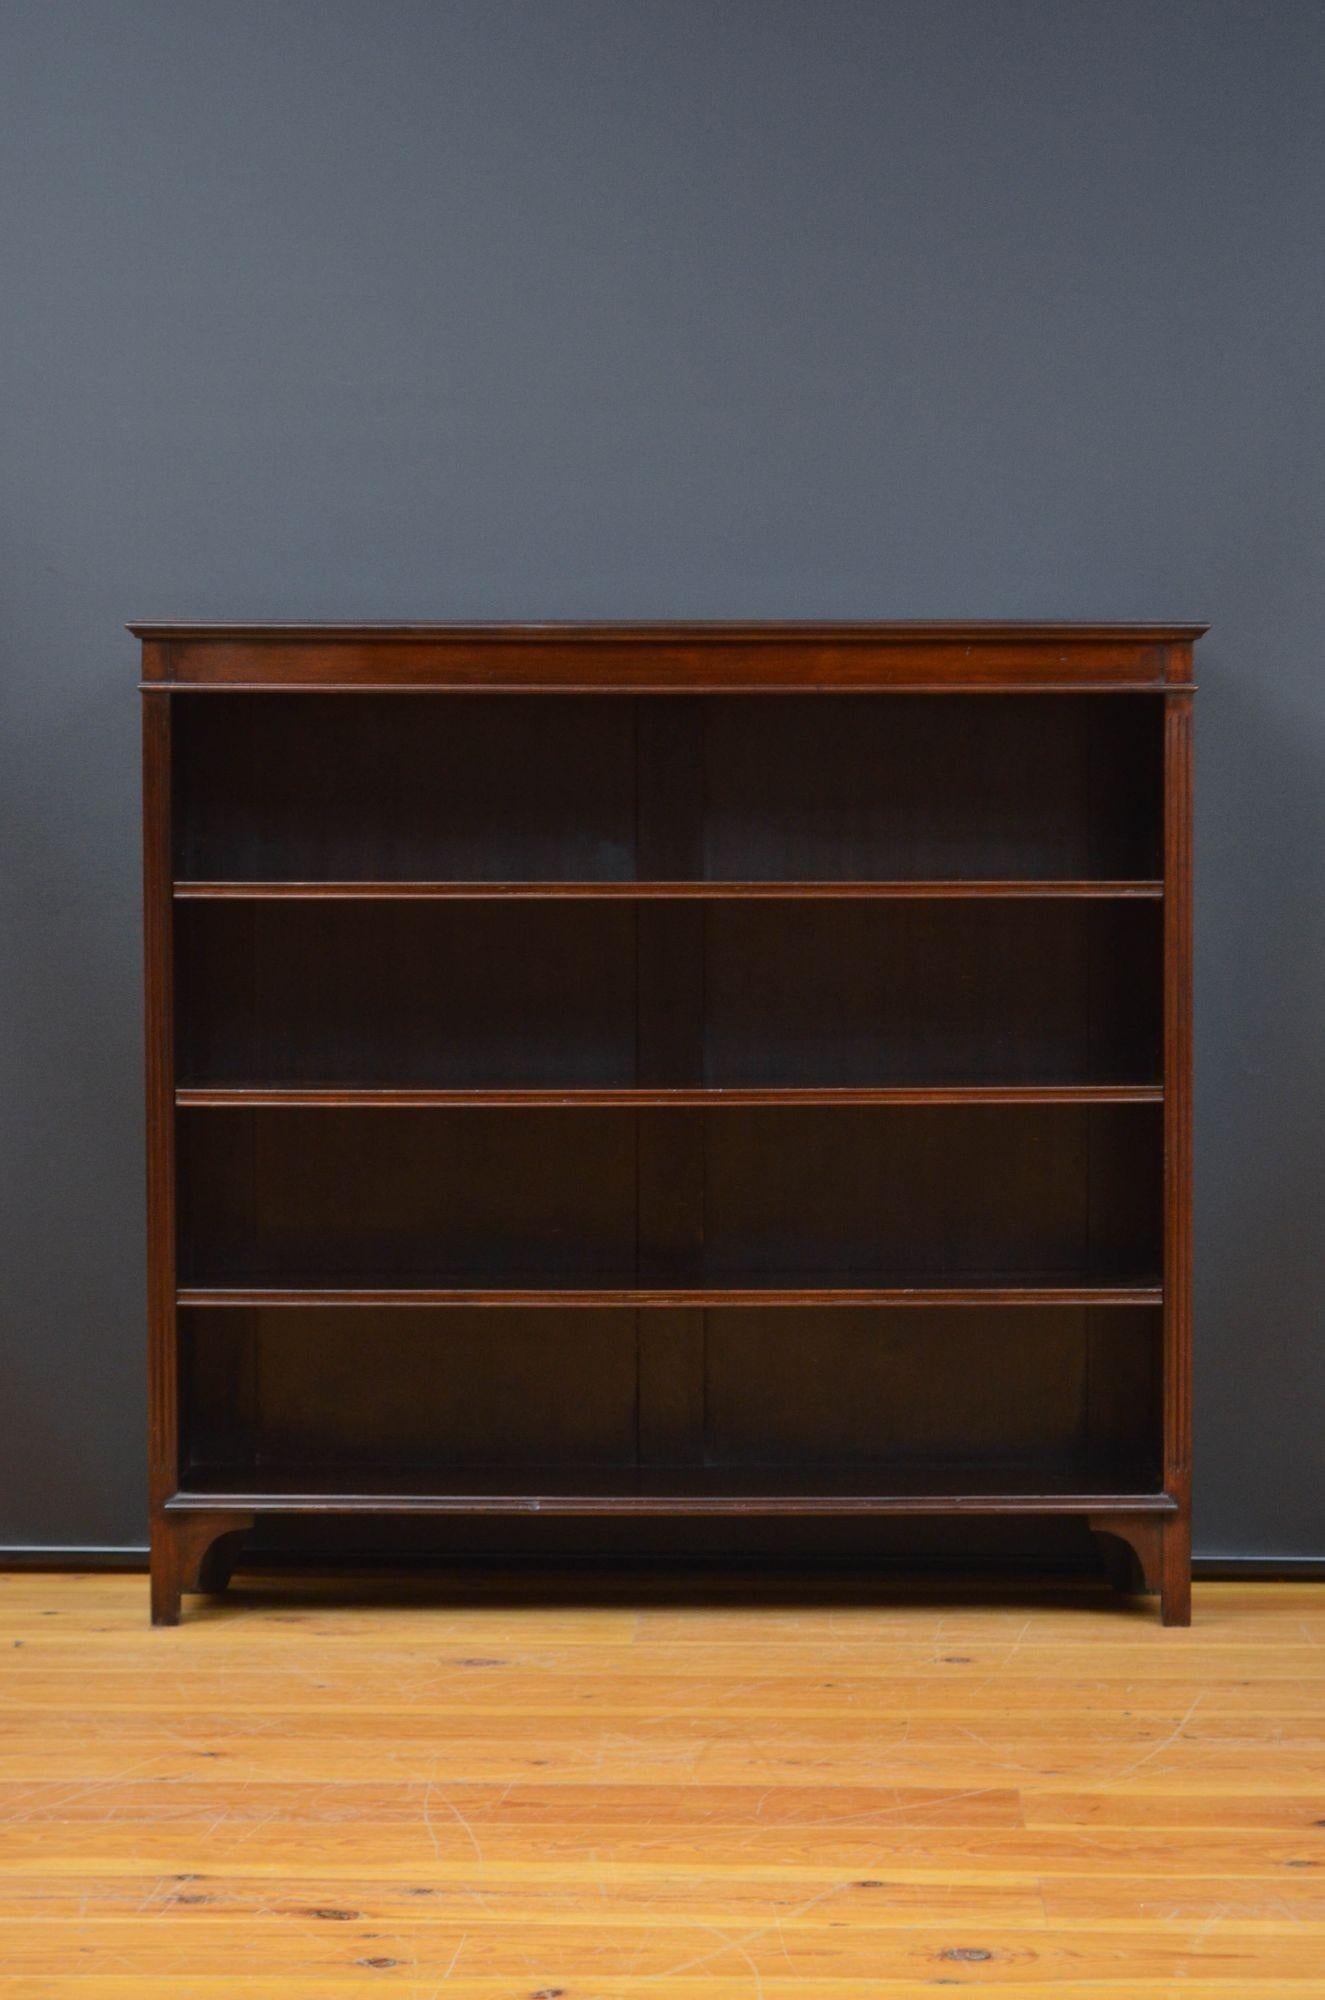 Edwardian Mahogany Open Bookcase In Good Condition For Sale In Whaley Bridge, GB